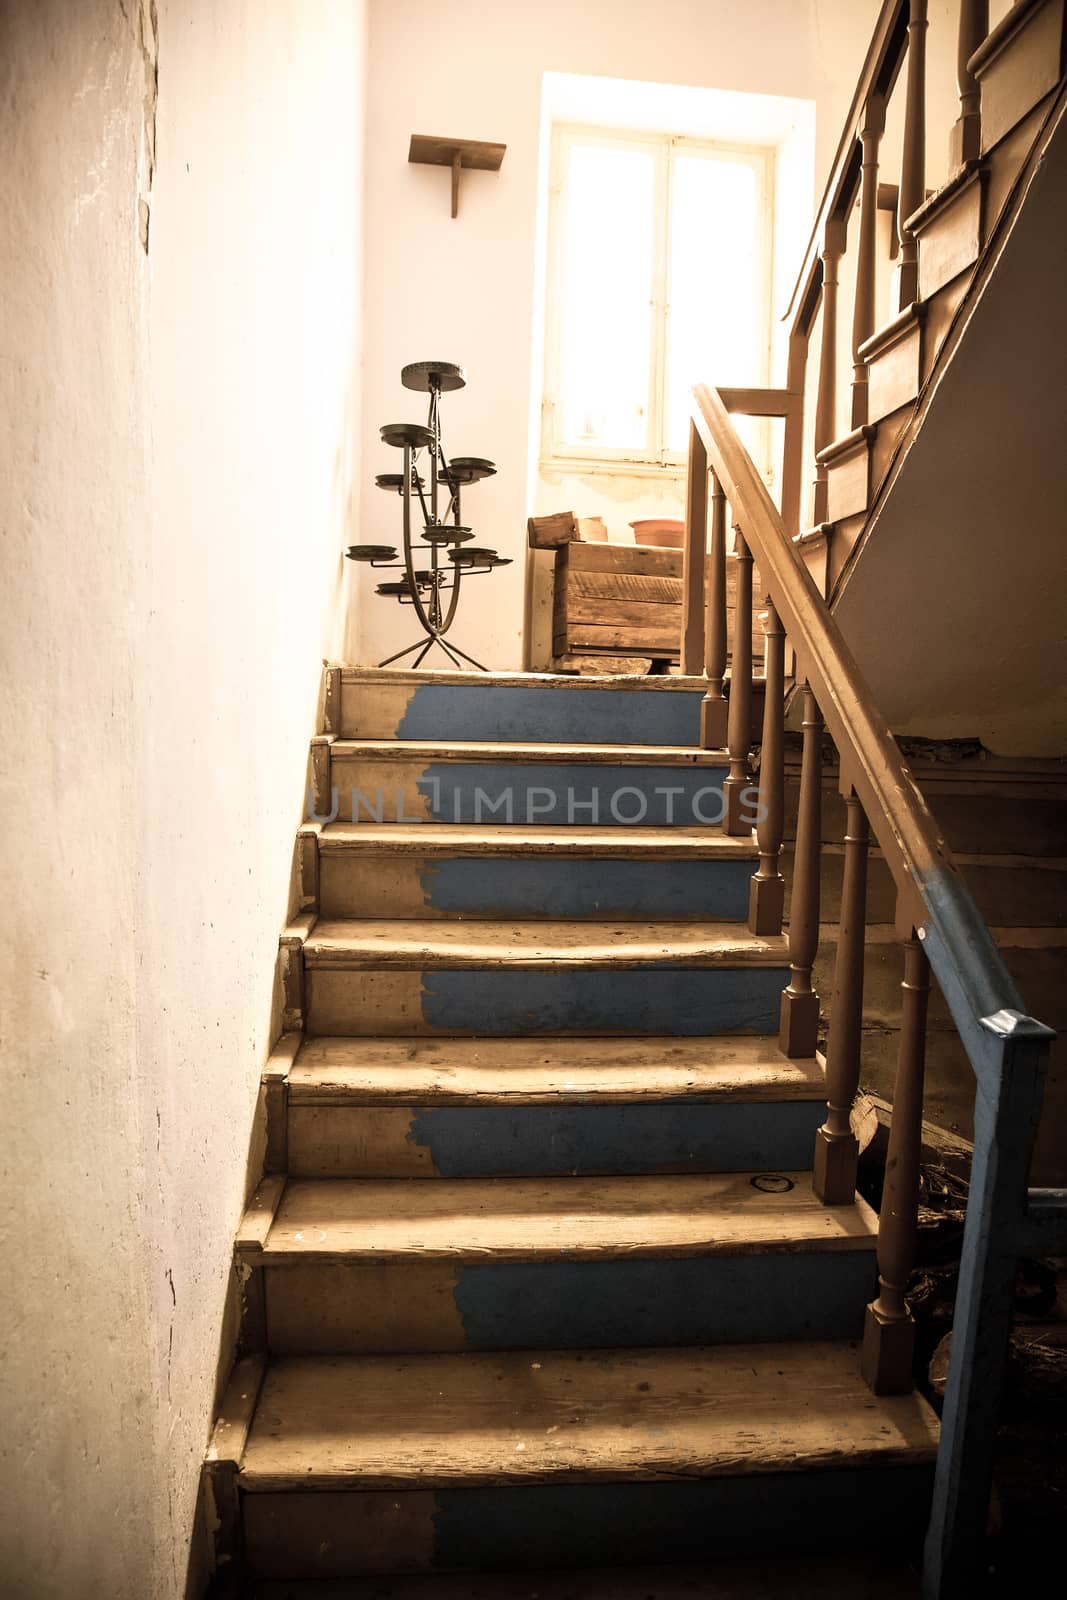 Vintage stairs, selective focus on the wooden steps.